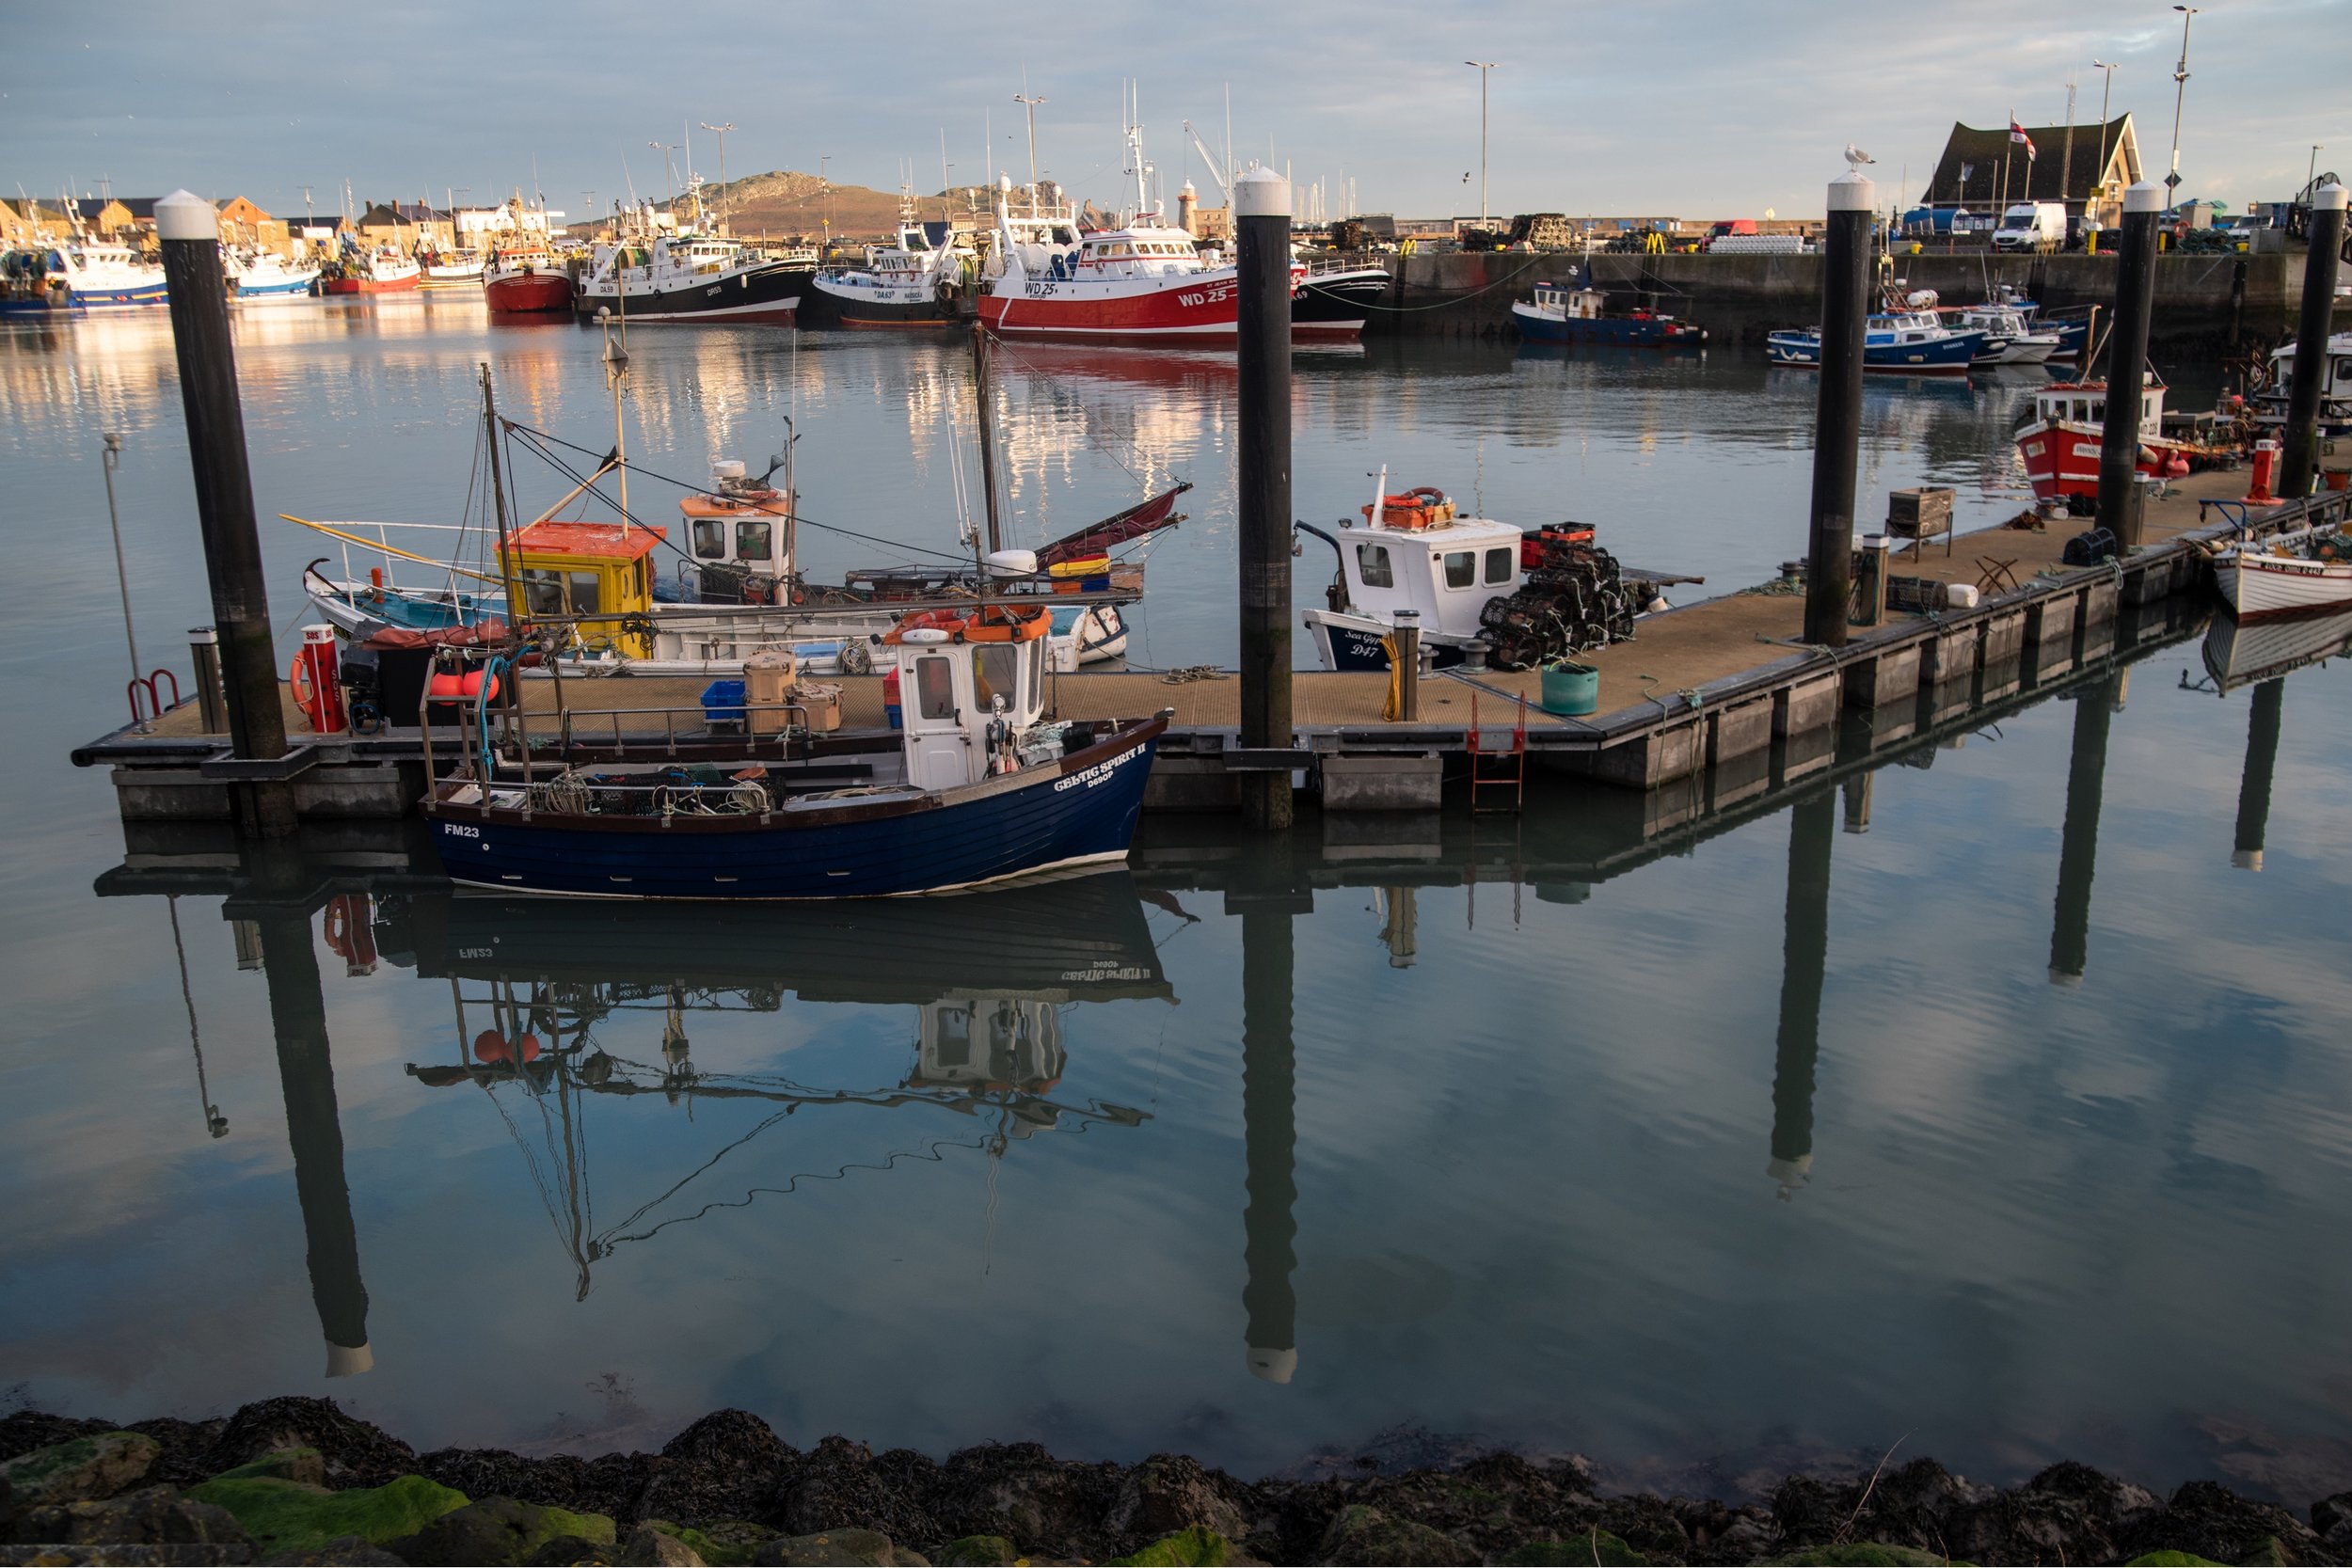 Travel tips for Howth, Ireland